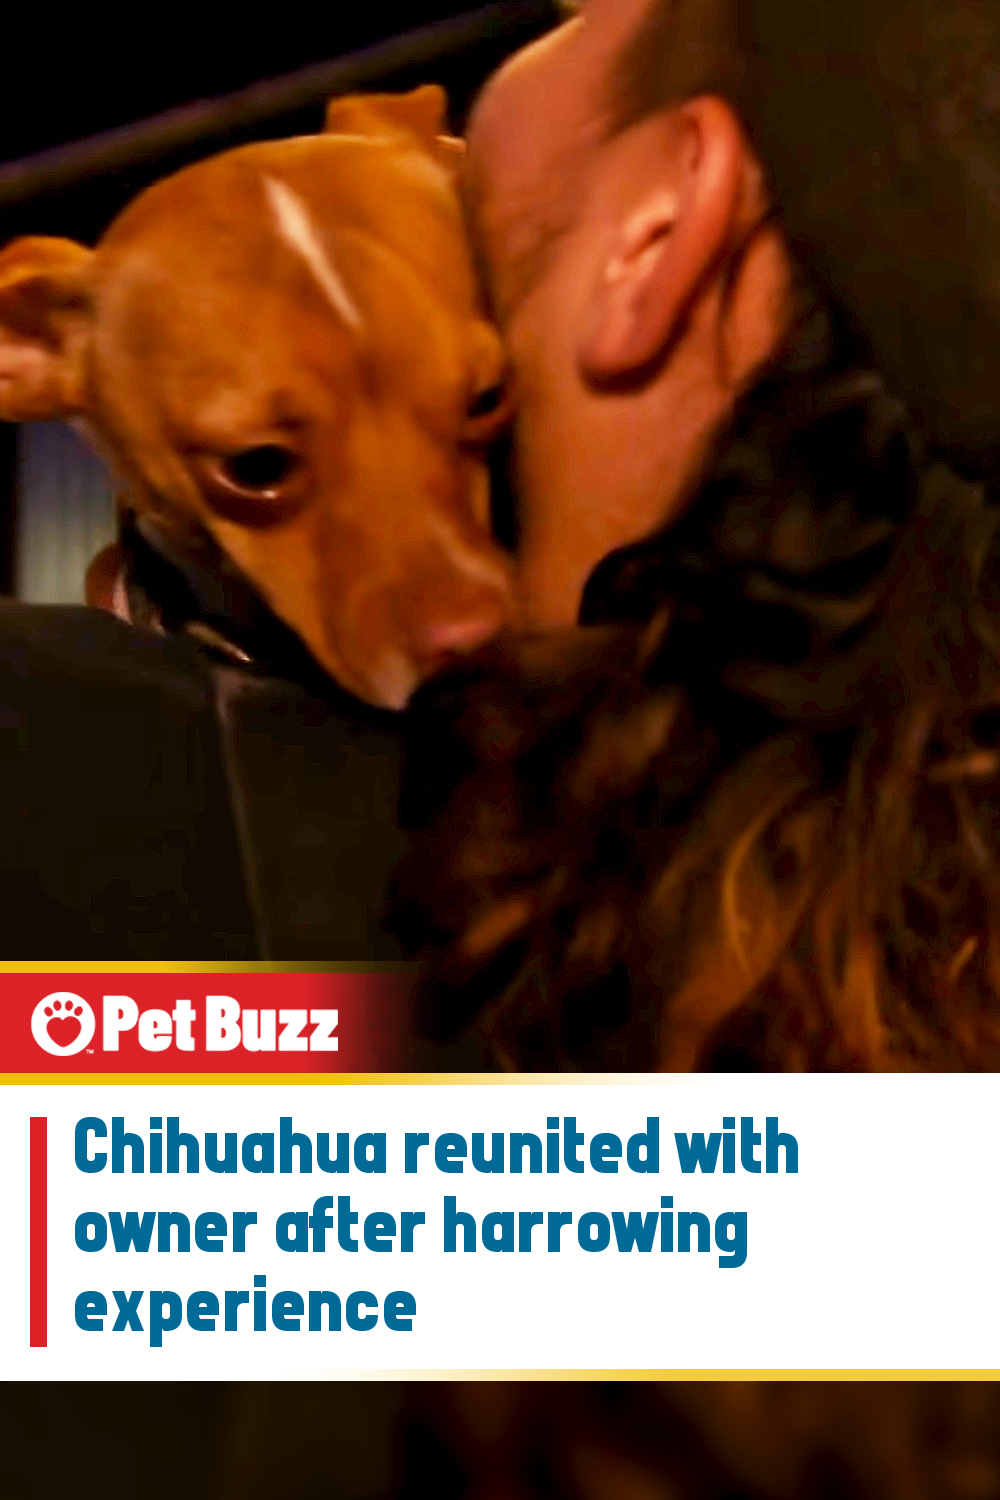 Chihuahua reunited with owner after harrowing experience